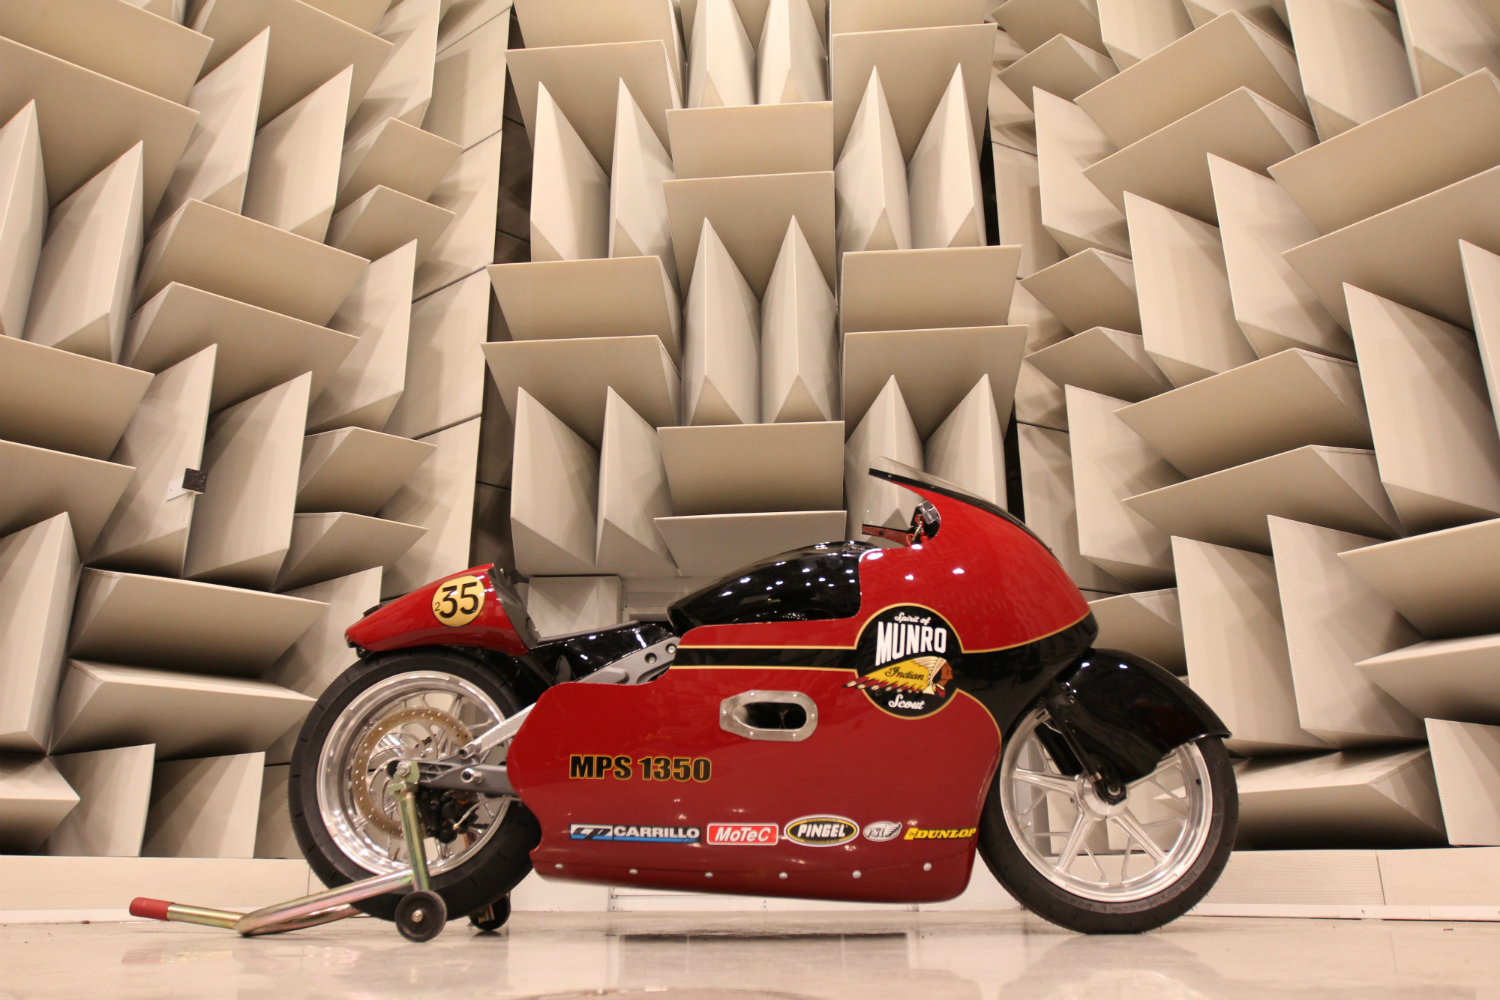 Indian Motorcycle set three land speed records